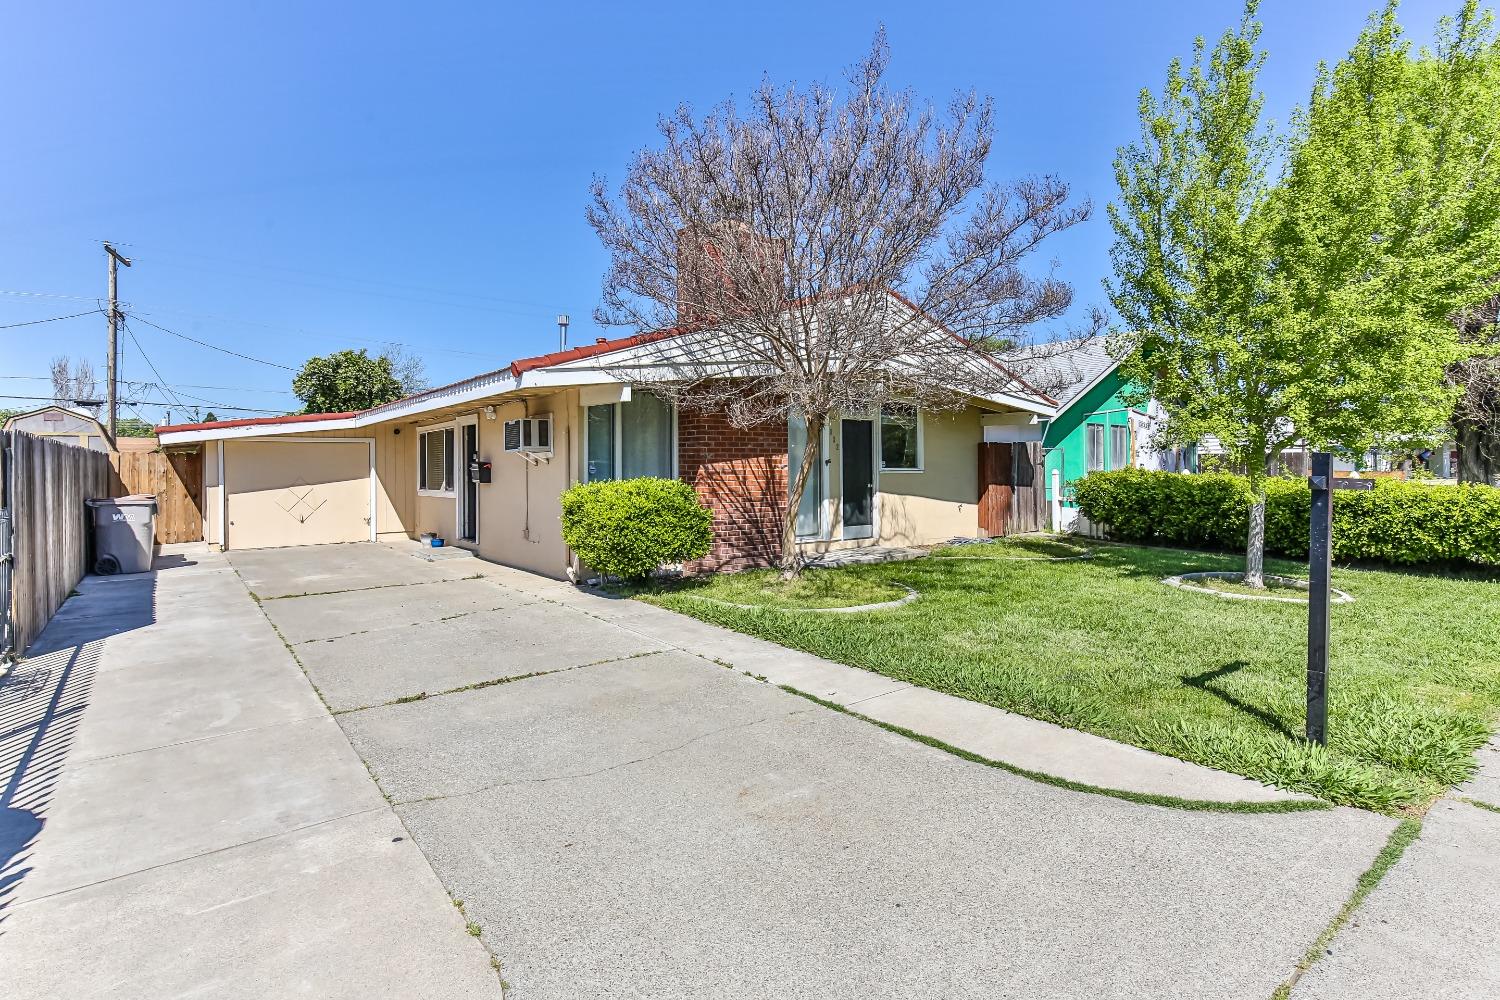 Photo of 832 Inglewood Dr in West Sacramento, CA